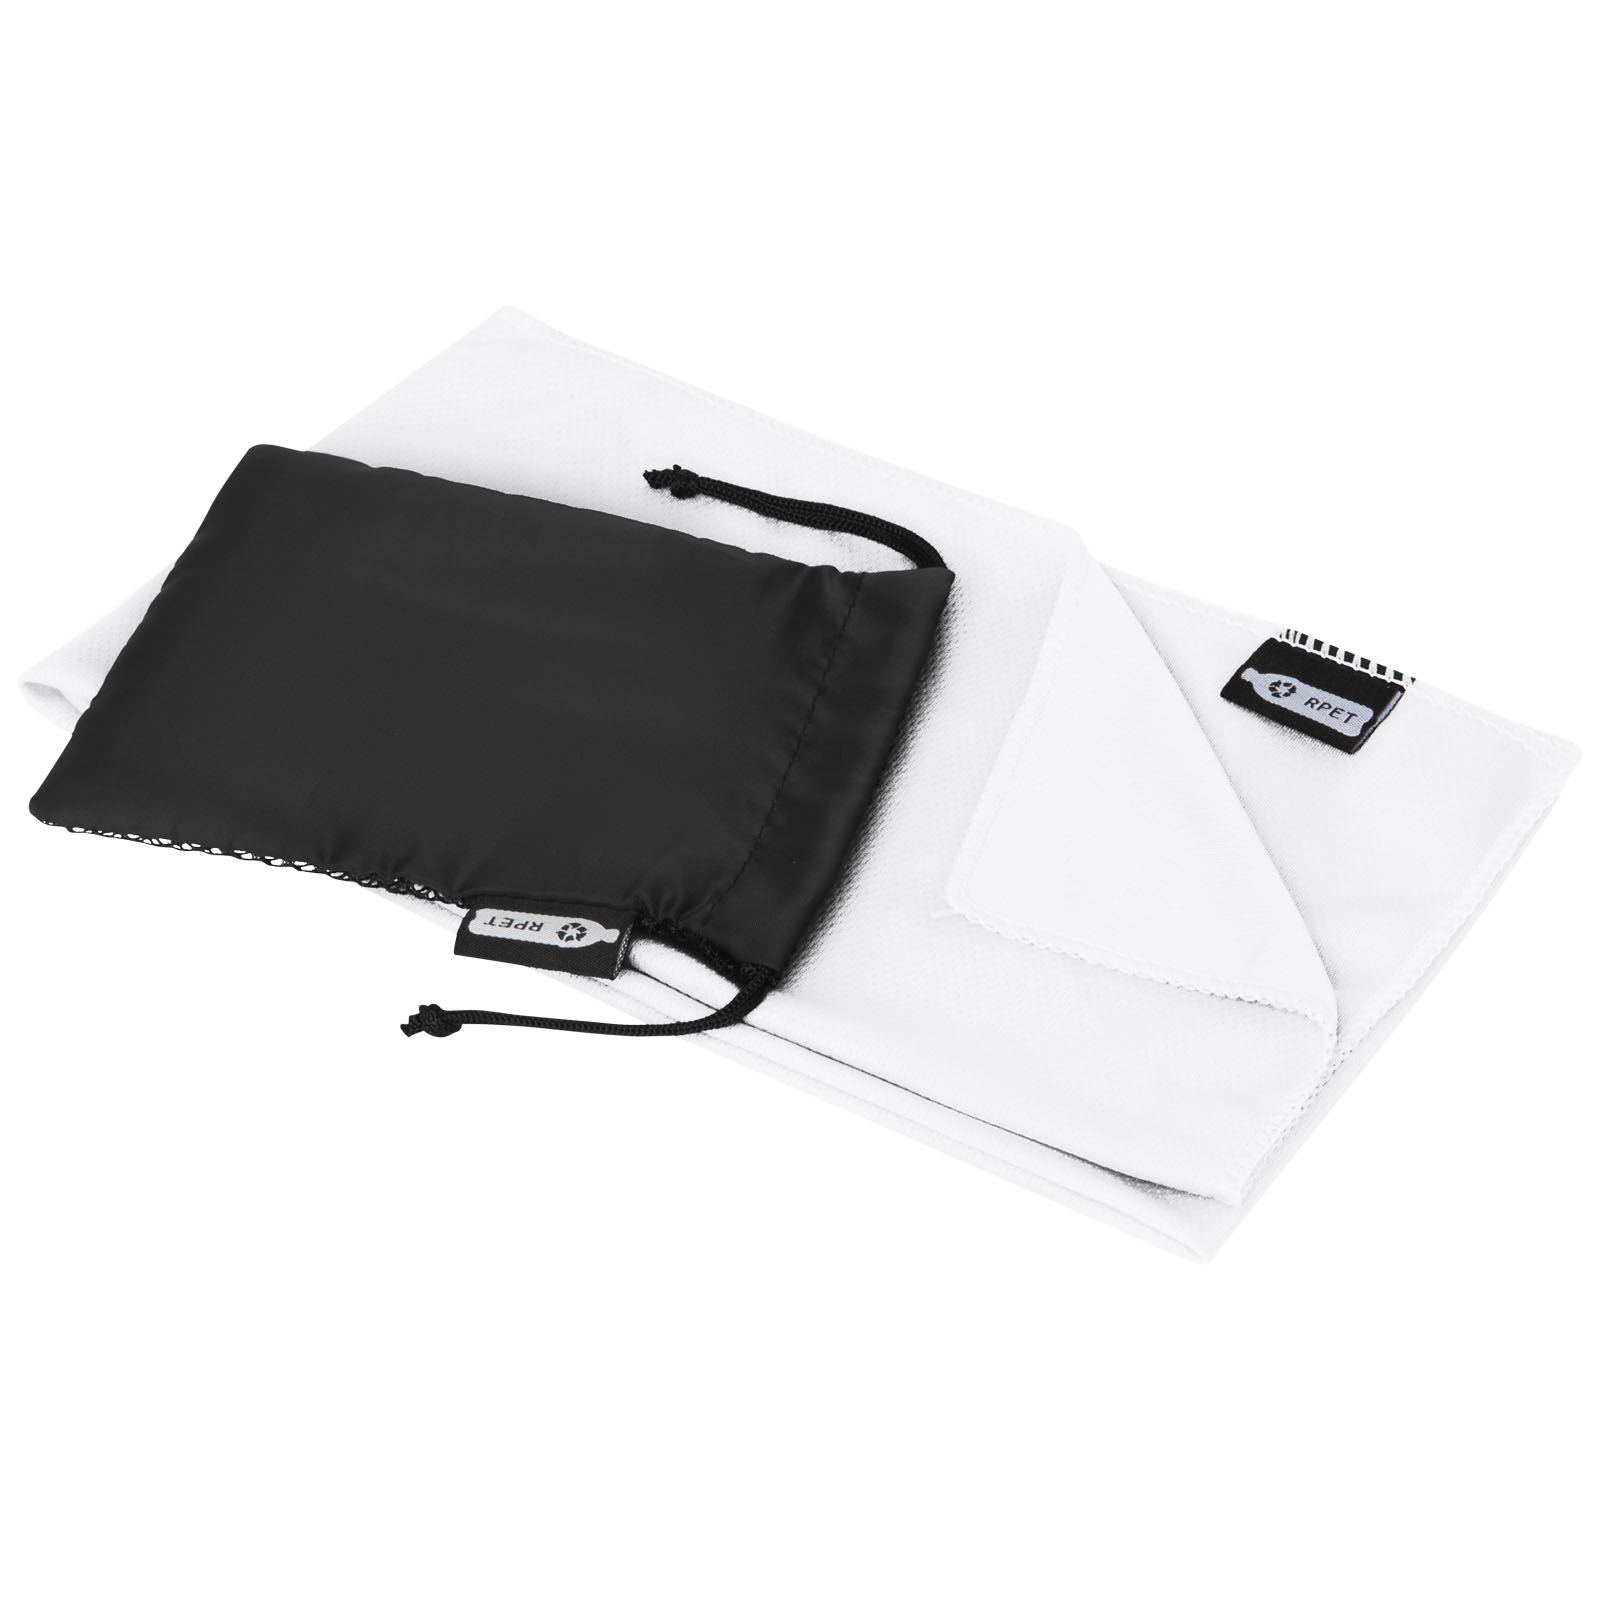 Reusable Cooling Towel with Carrying Pouch - Netherton